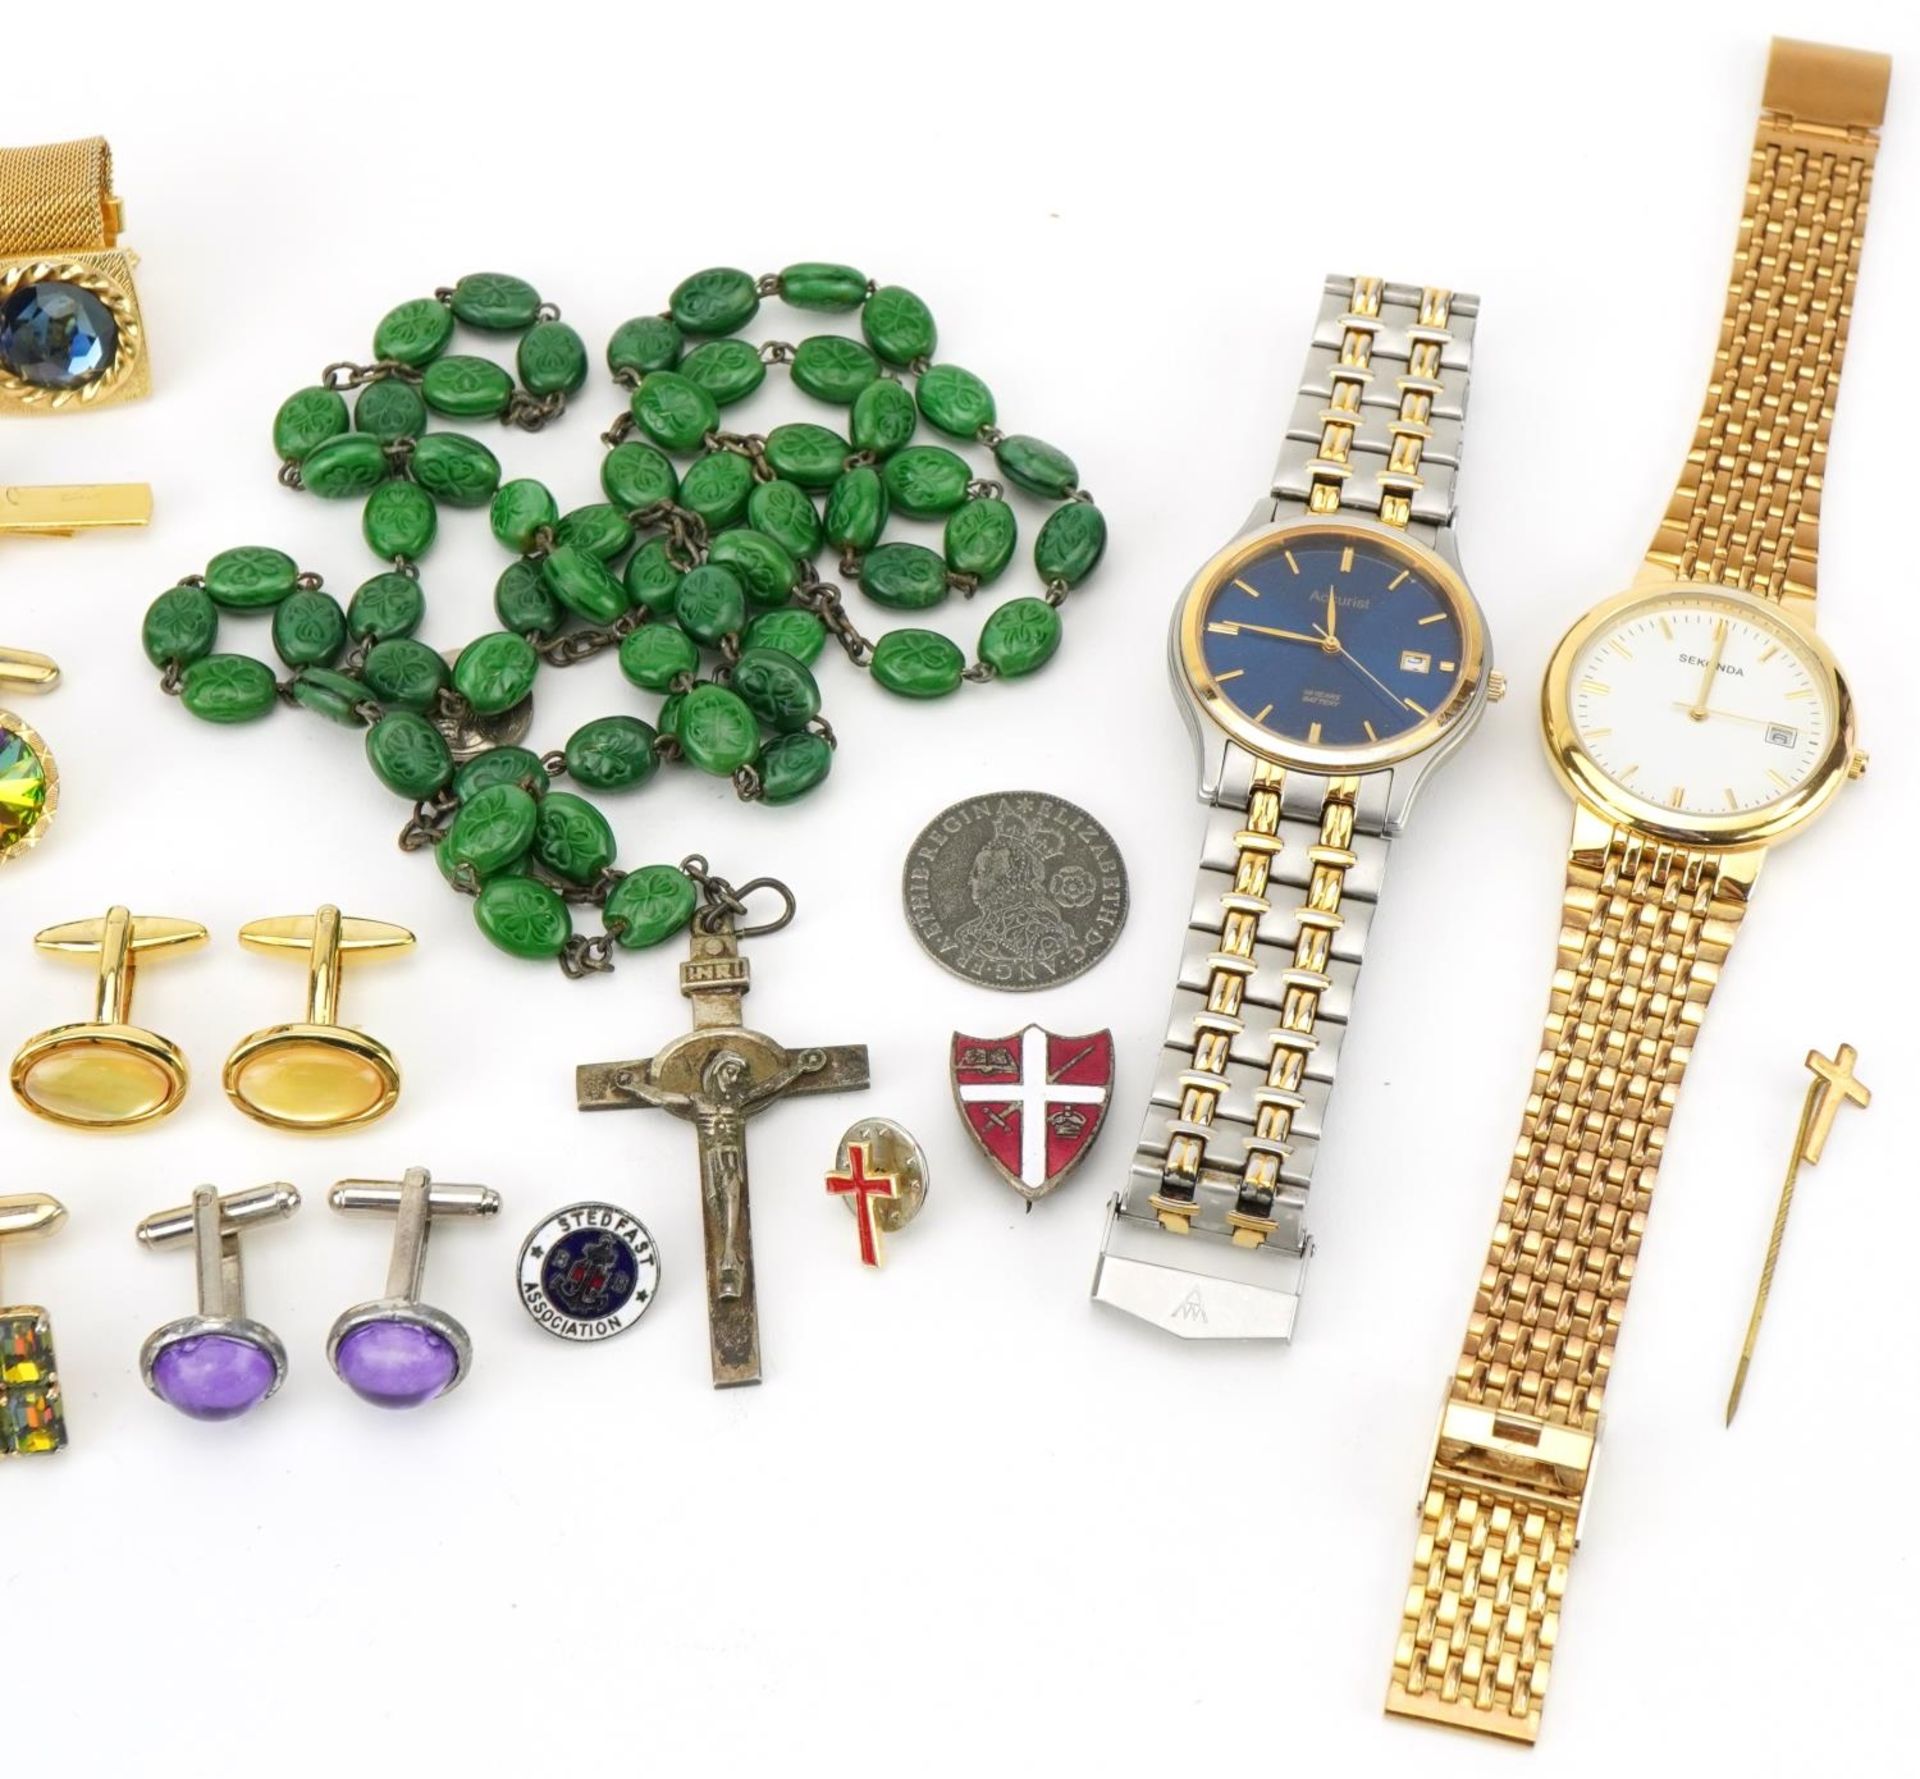 Costume jewellery including a malachite colour glass rosary bead necklace, cufflinks and - Image 4 of 4